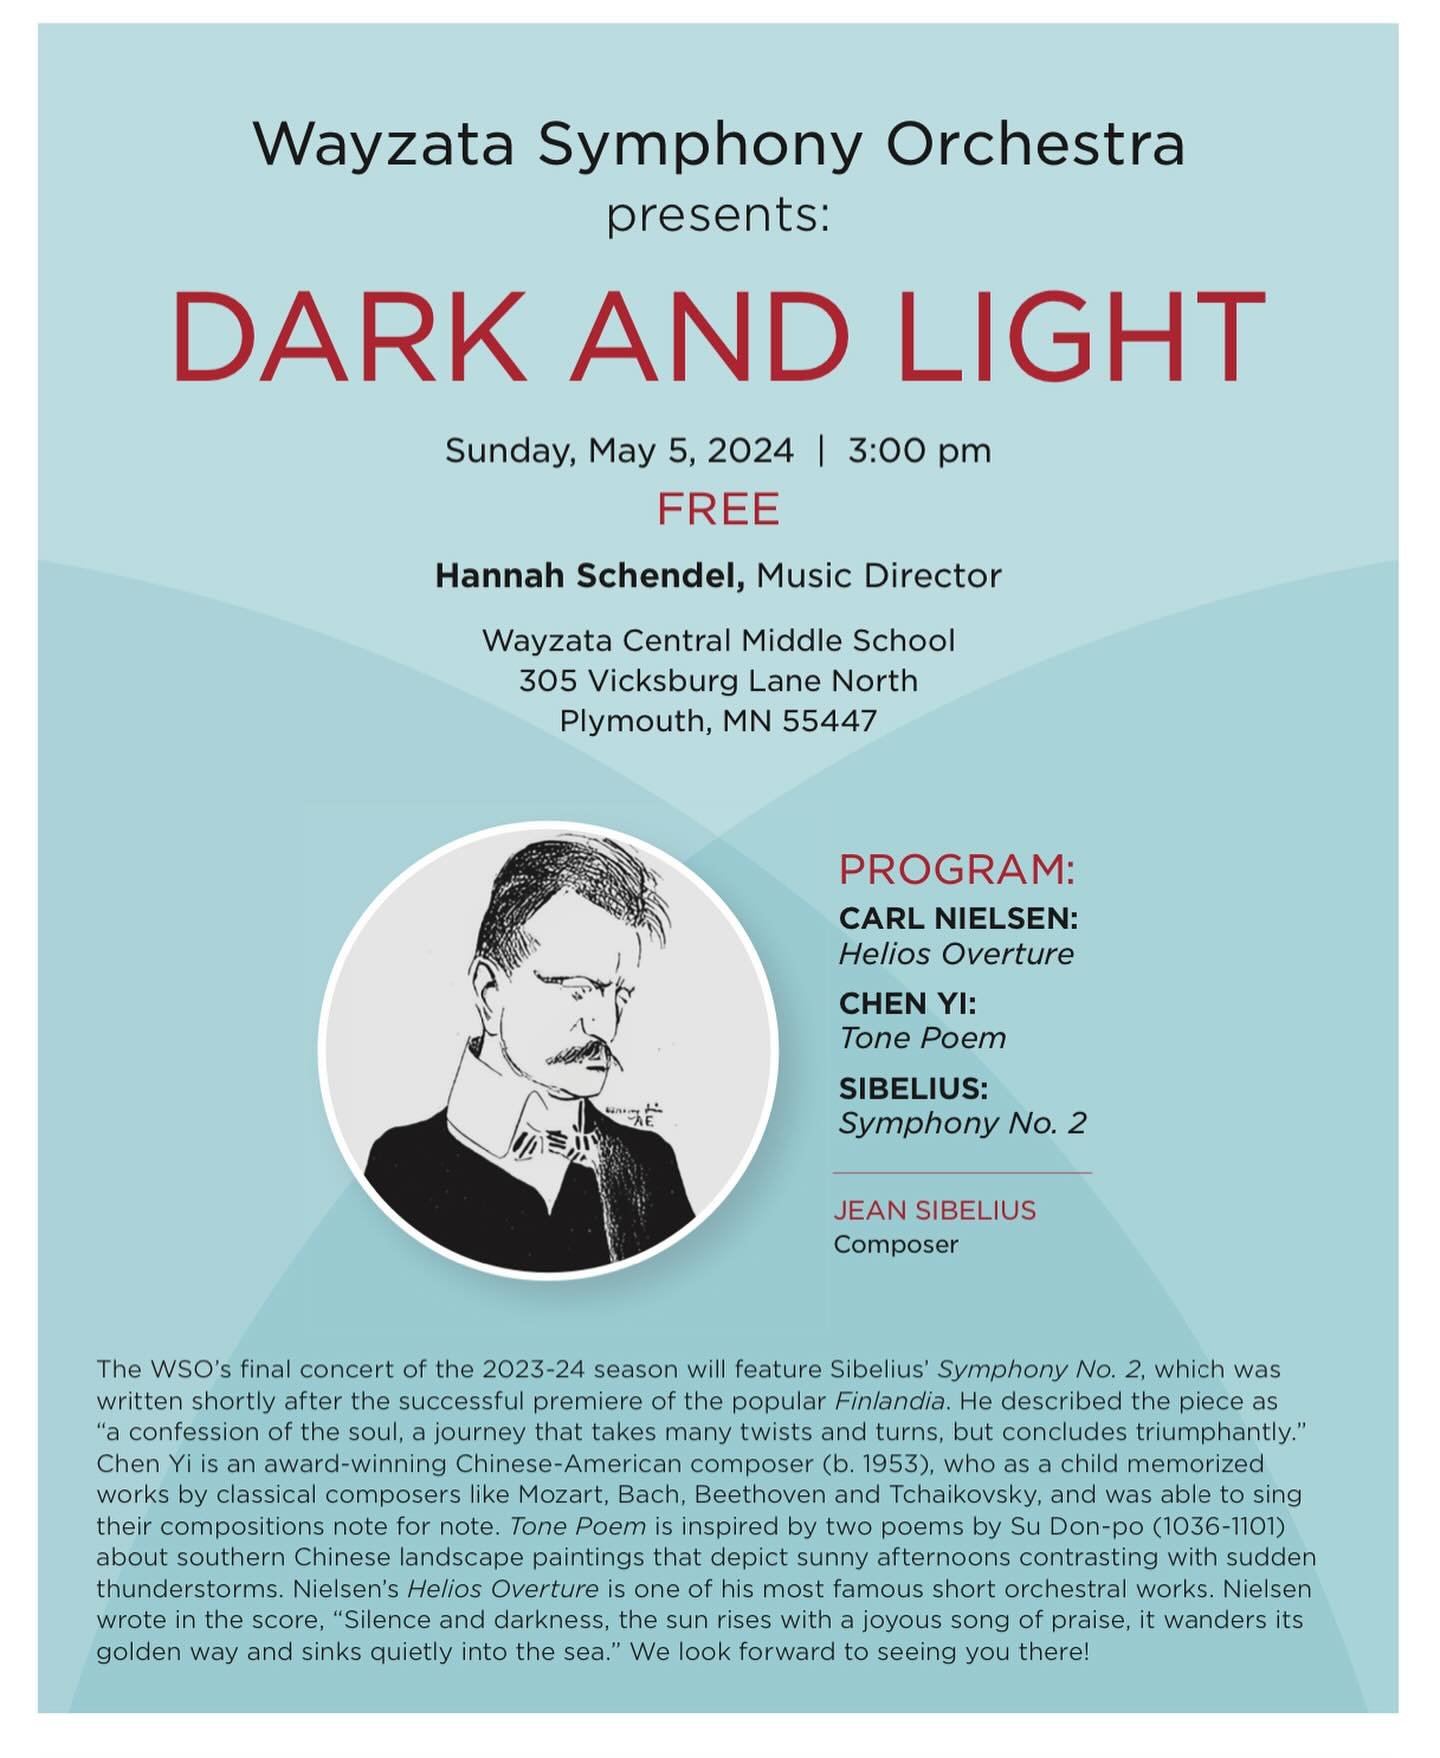 Dark/light, night/day, storm/sun, loud/soft, radiant/bleak, cold/ warm, old/new&hellip;this concert has all the contrasts! Looking forward to it! 

Nielsen: Helios Overture
Chen Yi: Tone Poem
Sibelius: Symphony No. 2

#nielsen #chenyi #sibelius 
@way